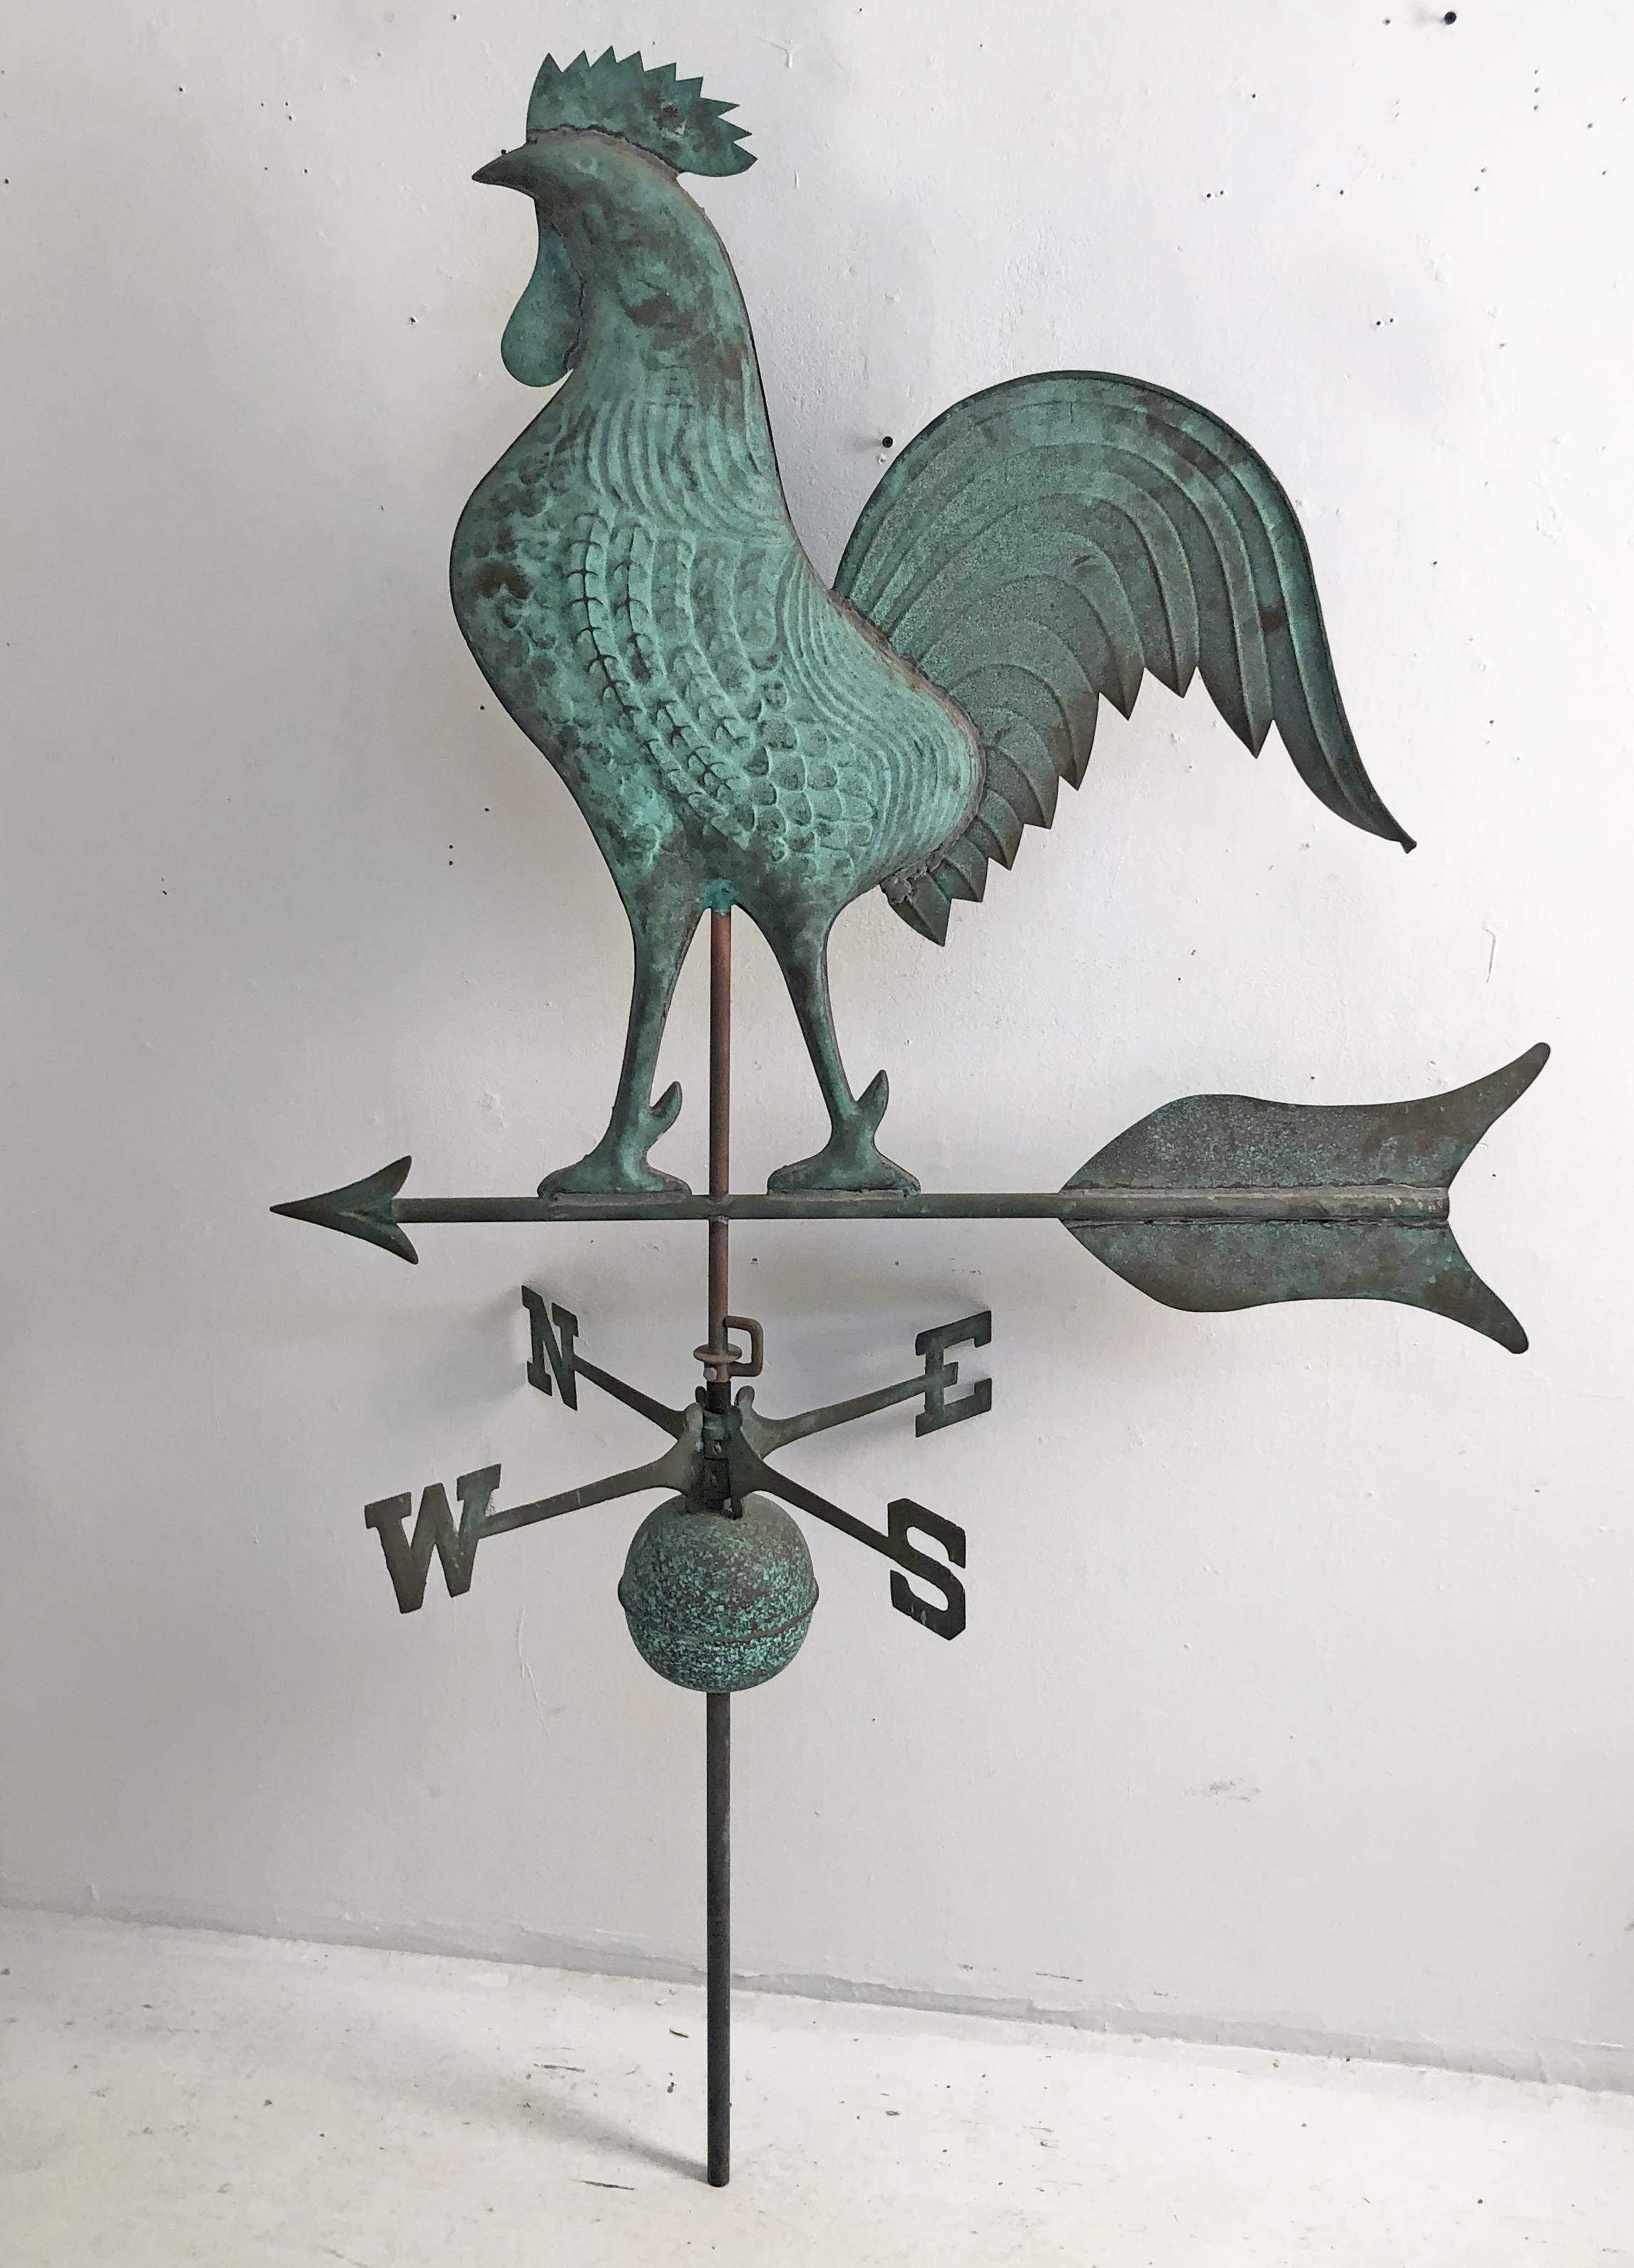 COPPER WEATHER VANE OF ROOSTER